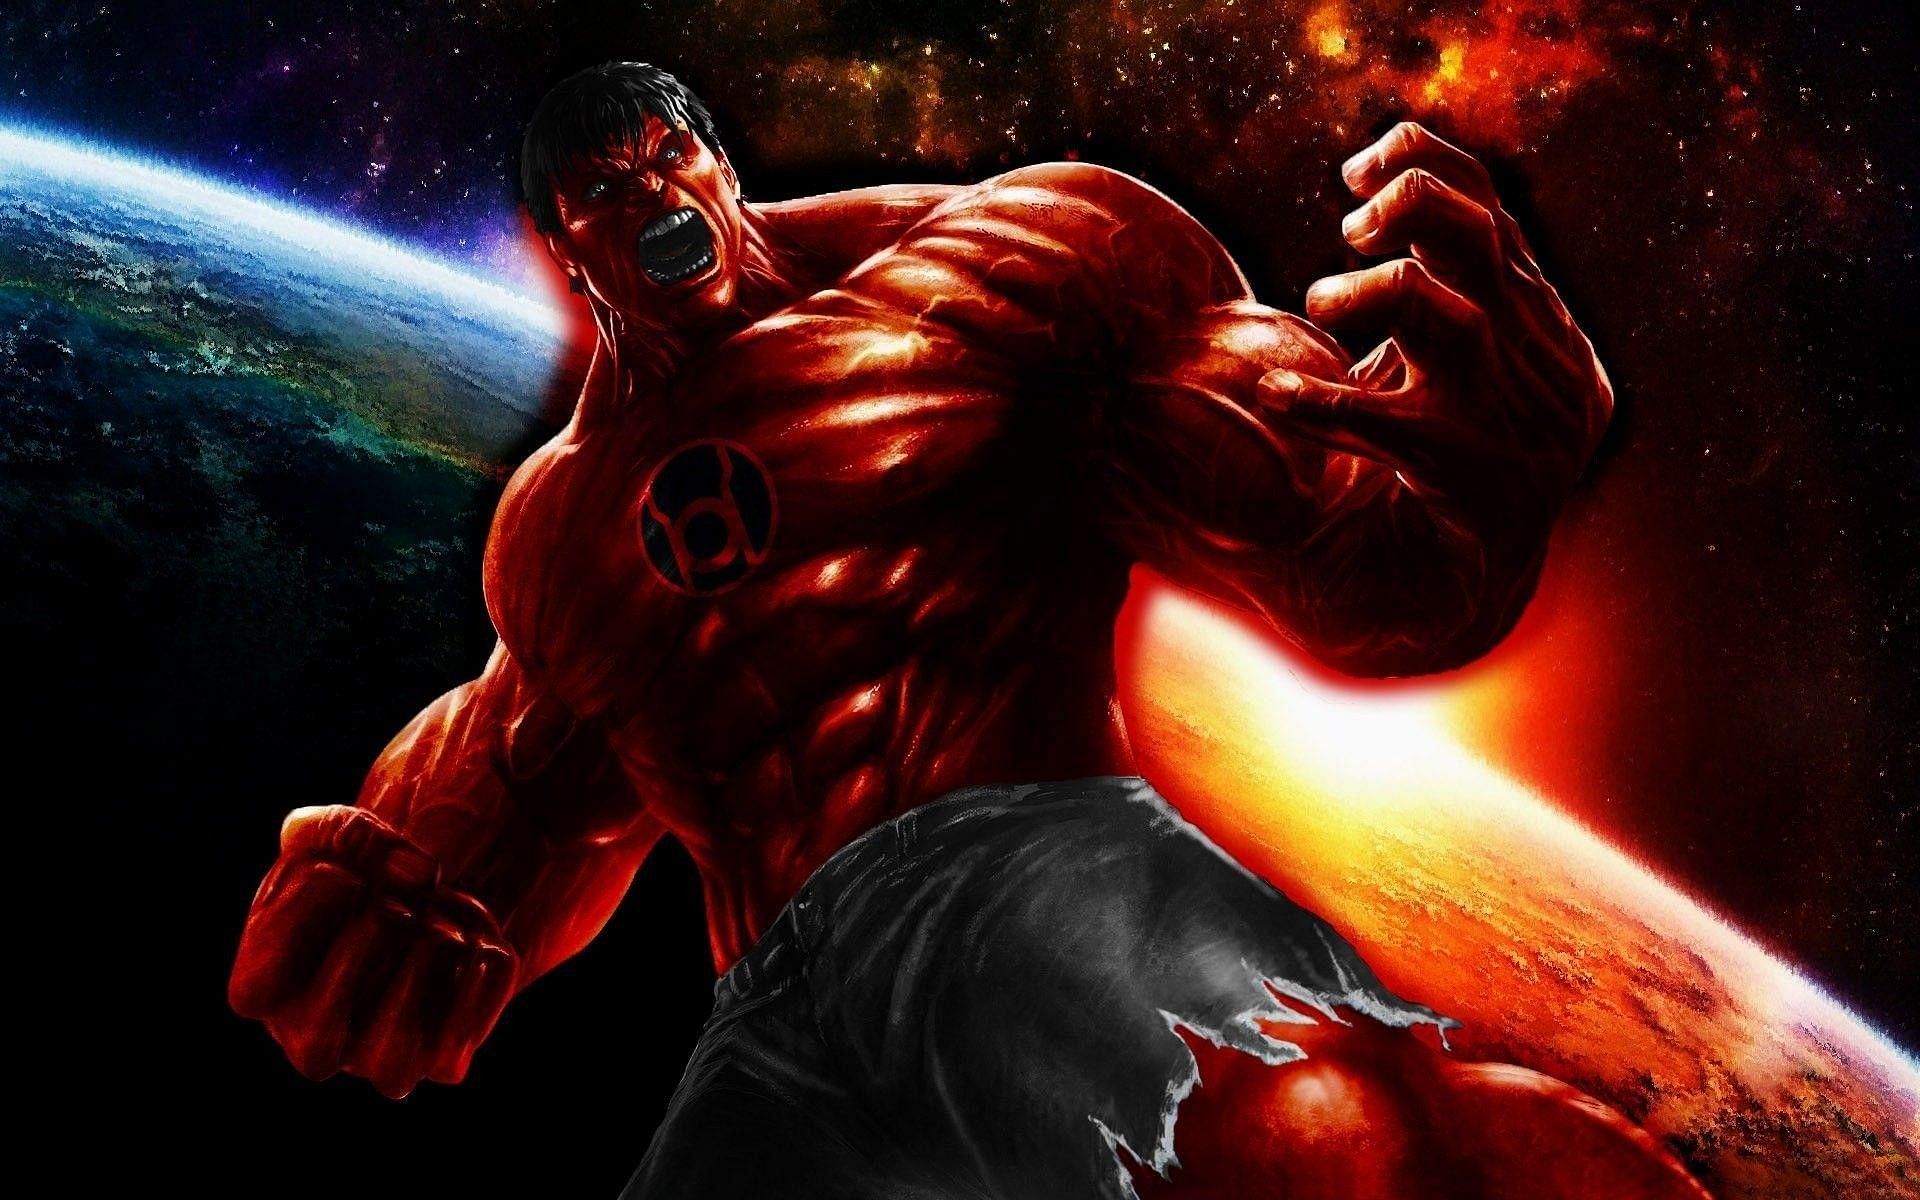 Red Hulk is a Marvel Comics character who first appeared in &quot;Hulk&quot; #1 in 2008. (Image via Marvel)